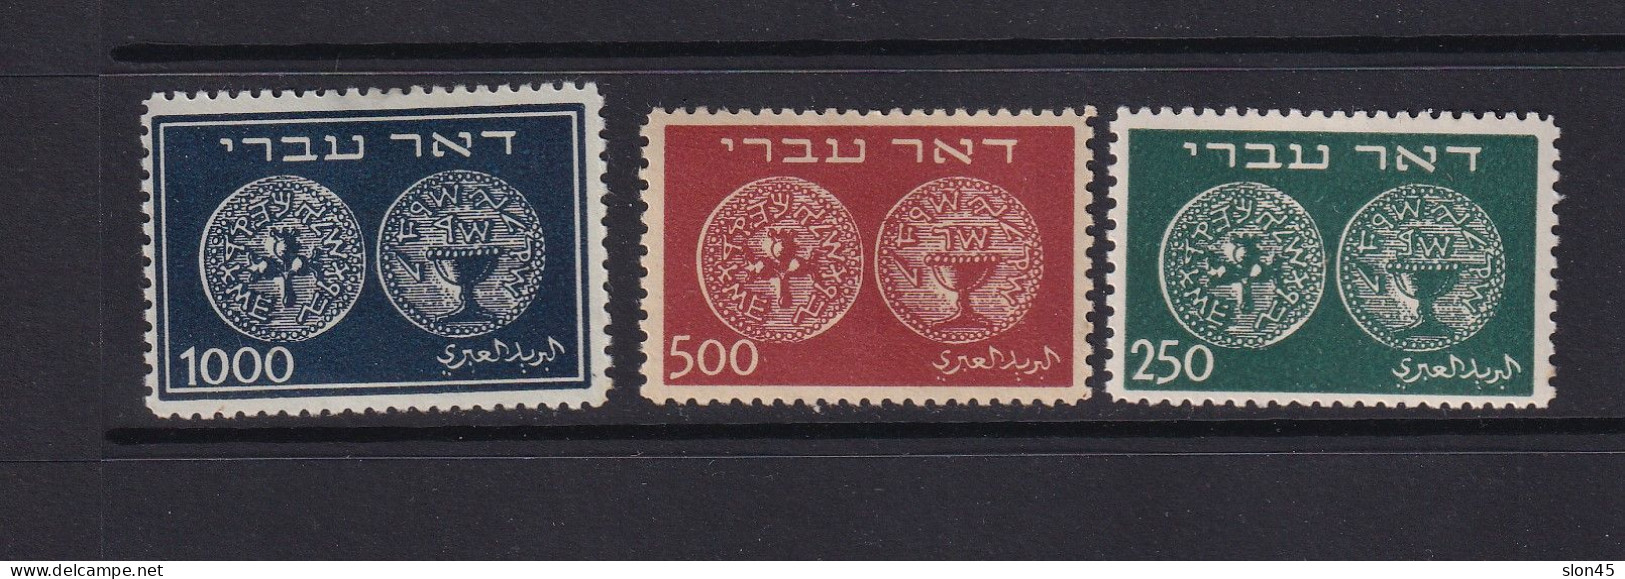 Israel 1948 Coins Key Stamps MH Sc 7-9 CV$302 MH 15690 - Ungebraucht (ohne Tabs)